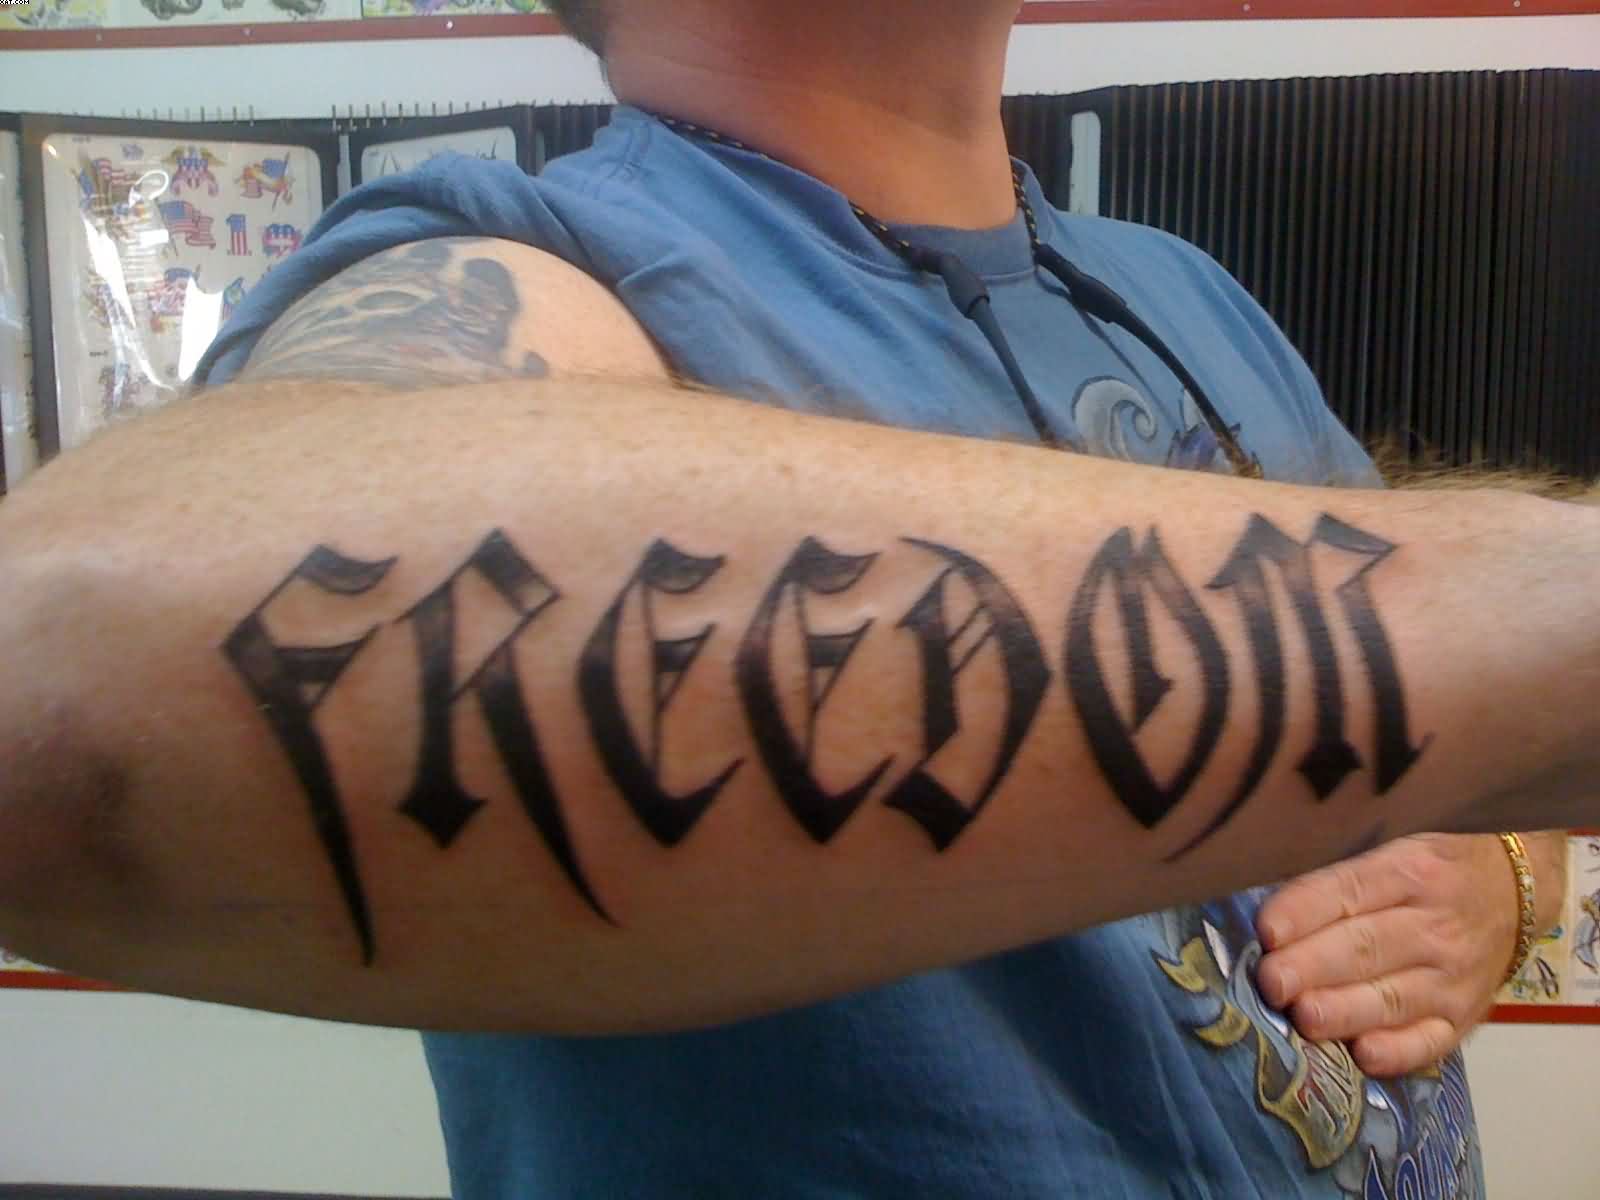 10. "Freedom" Word Tattoo Inspiration for Men - wide 2